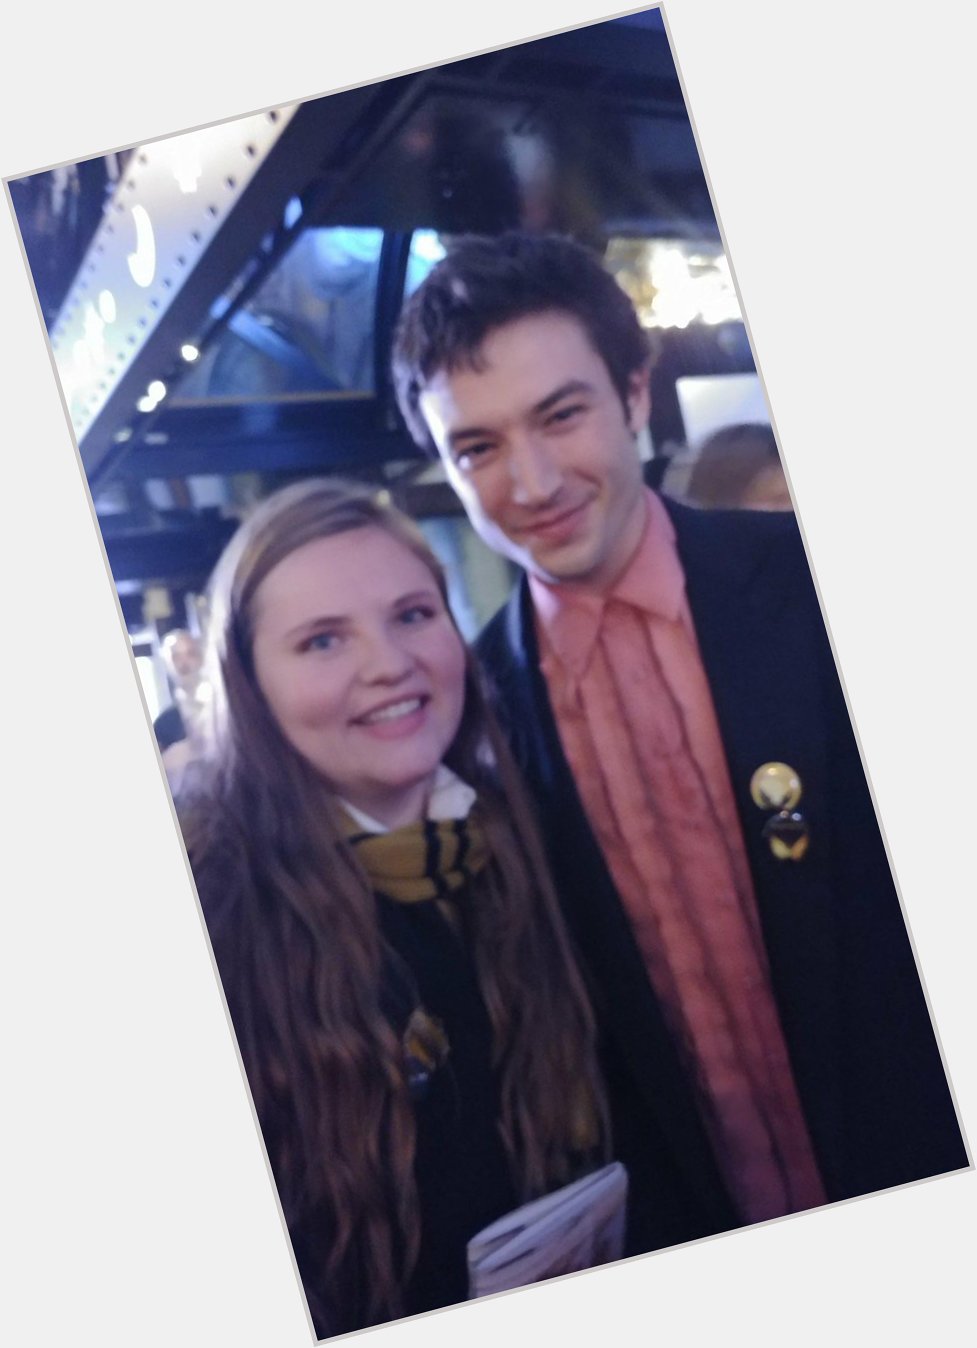 I look horrible and it\s blurry but I would like to wish Ezra Miller a very happy birthday today!!        